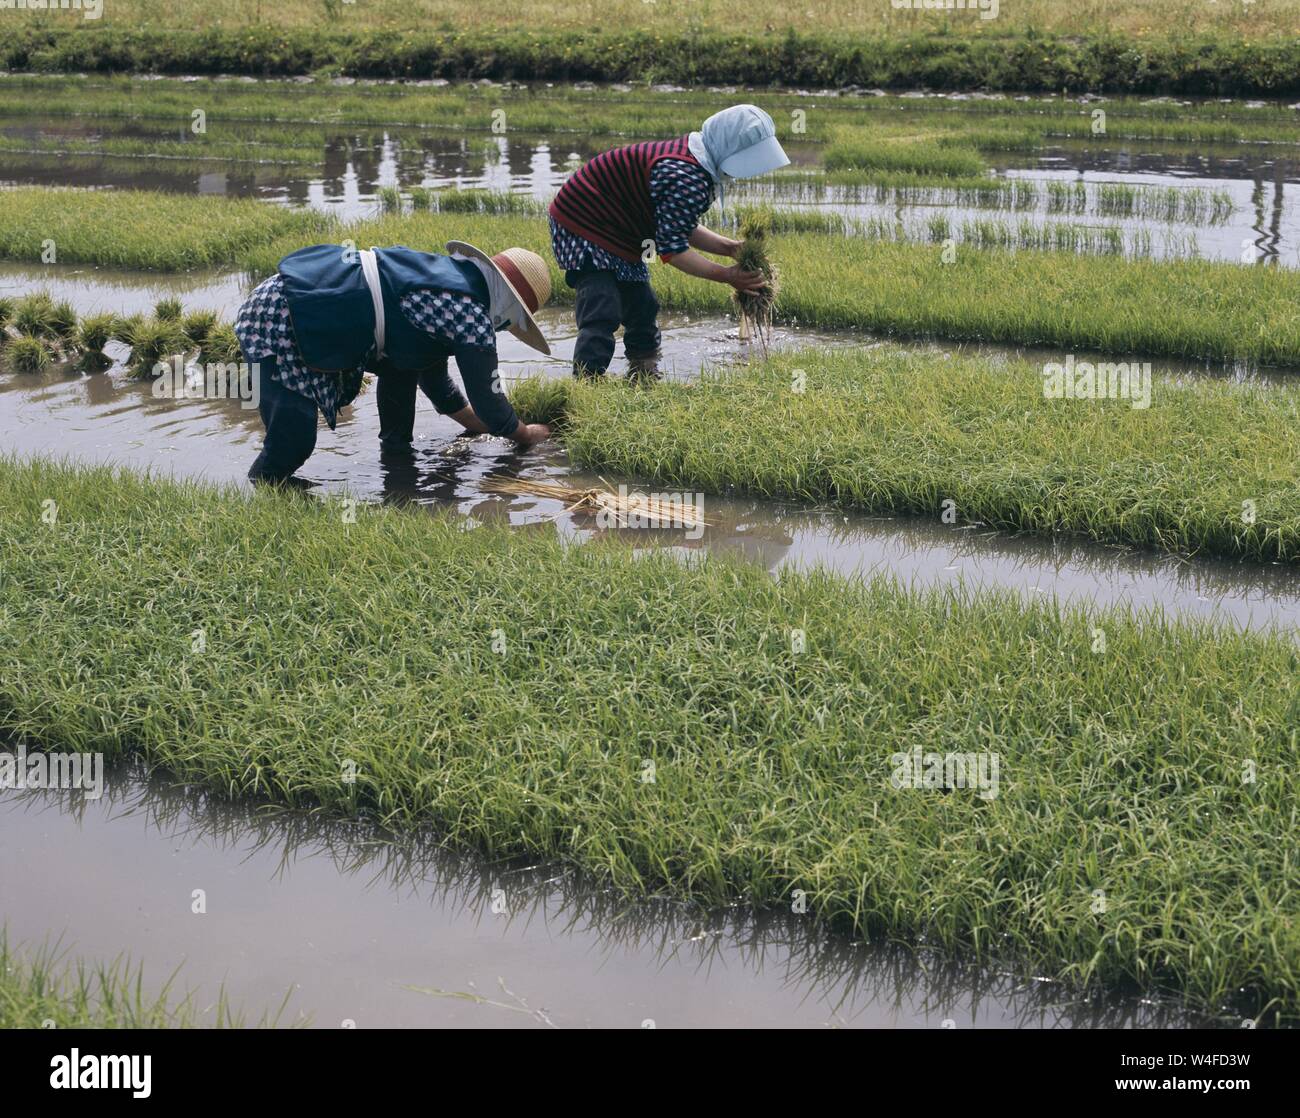 Japan, Honshu, Yamanashi Prefecture, Female Farmers Dressed in Traditional Farming Clothing Planting Rice Stock Photo